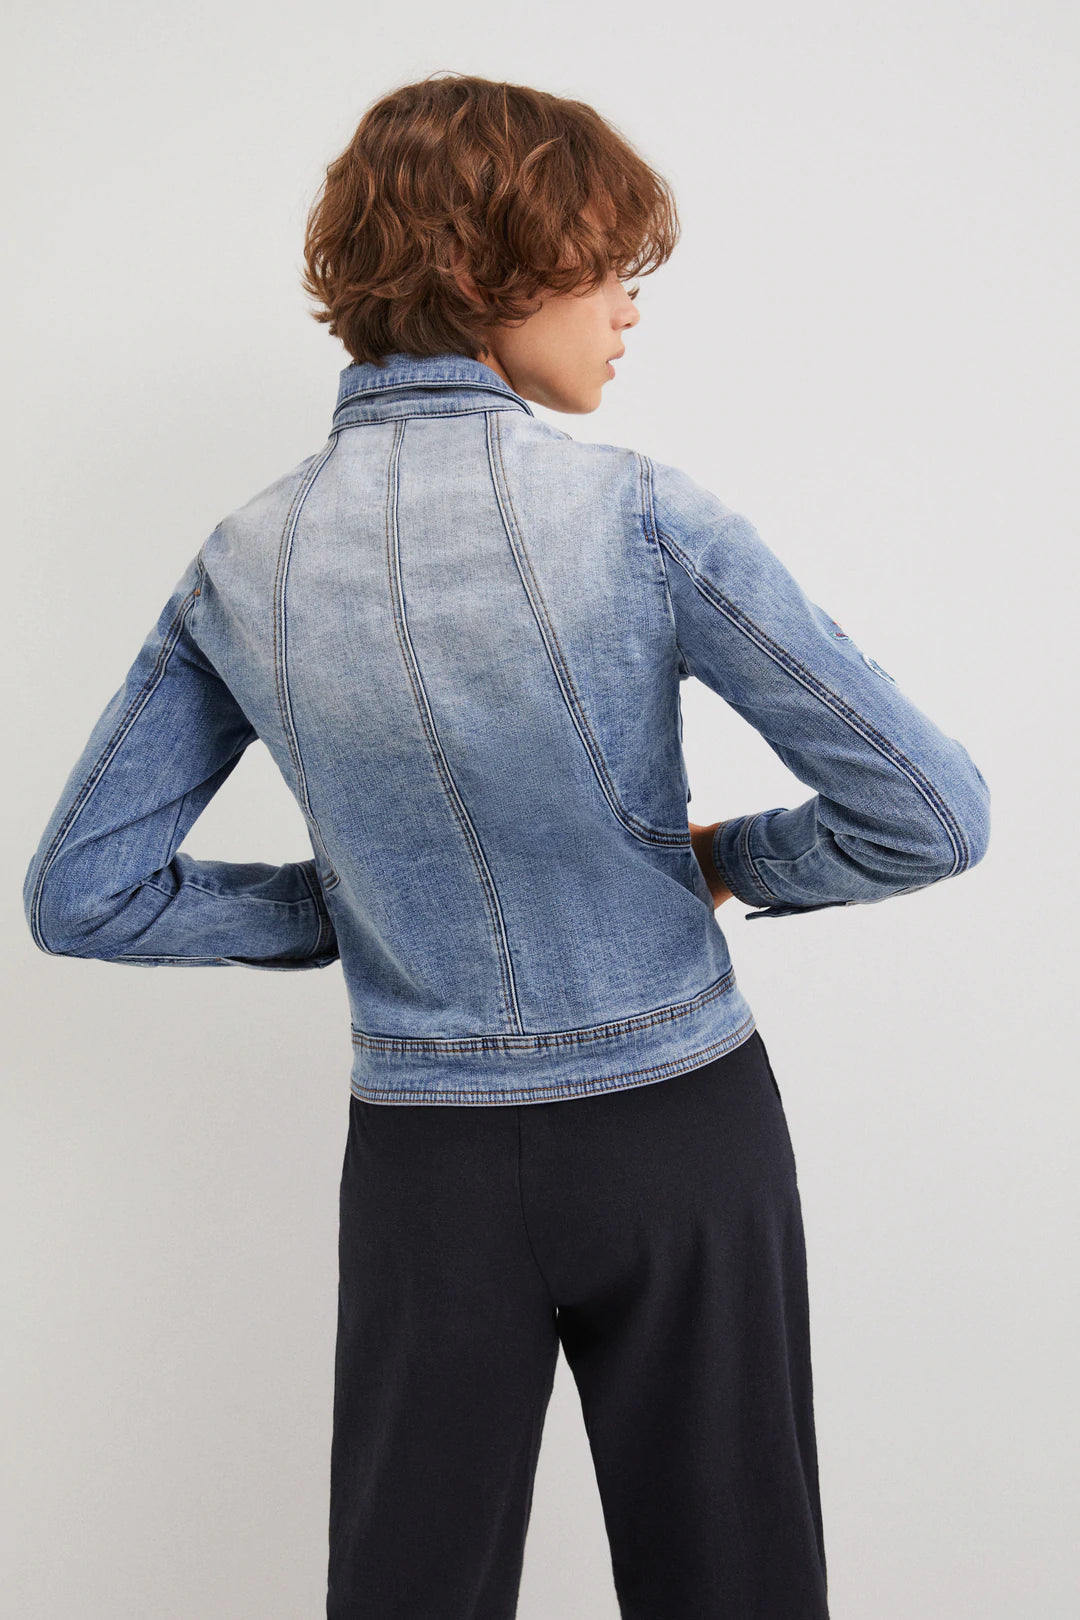 Embroidered Paisley Zip Jean Jacket